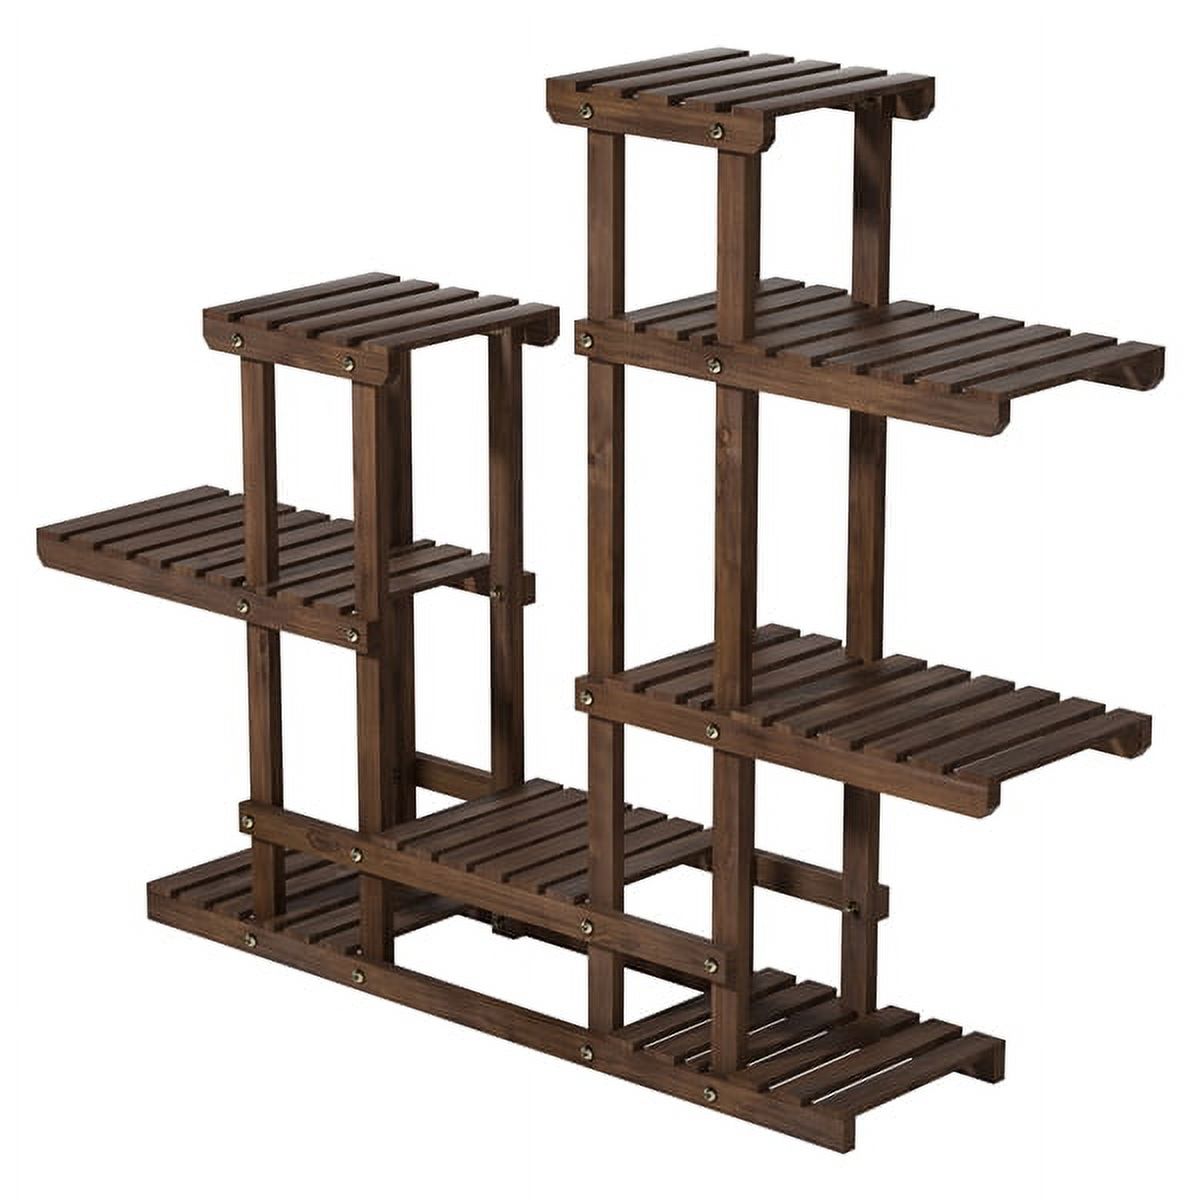 SmileMart 6-Tier Wooden Flower and Plant Display Stand for Garden, 38" H, Brown - image 4 of 9